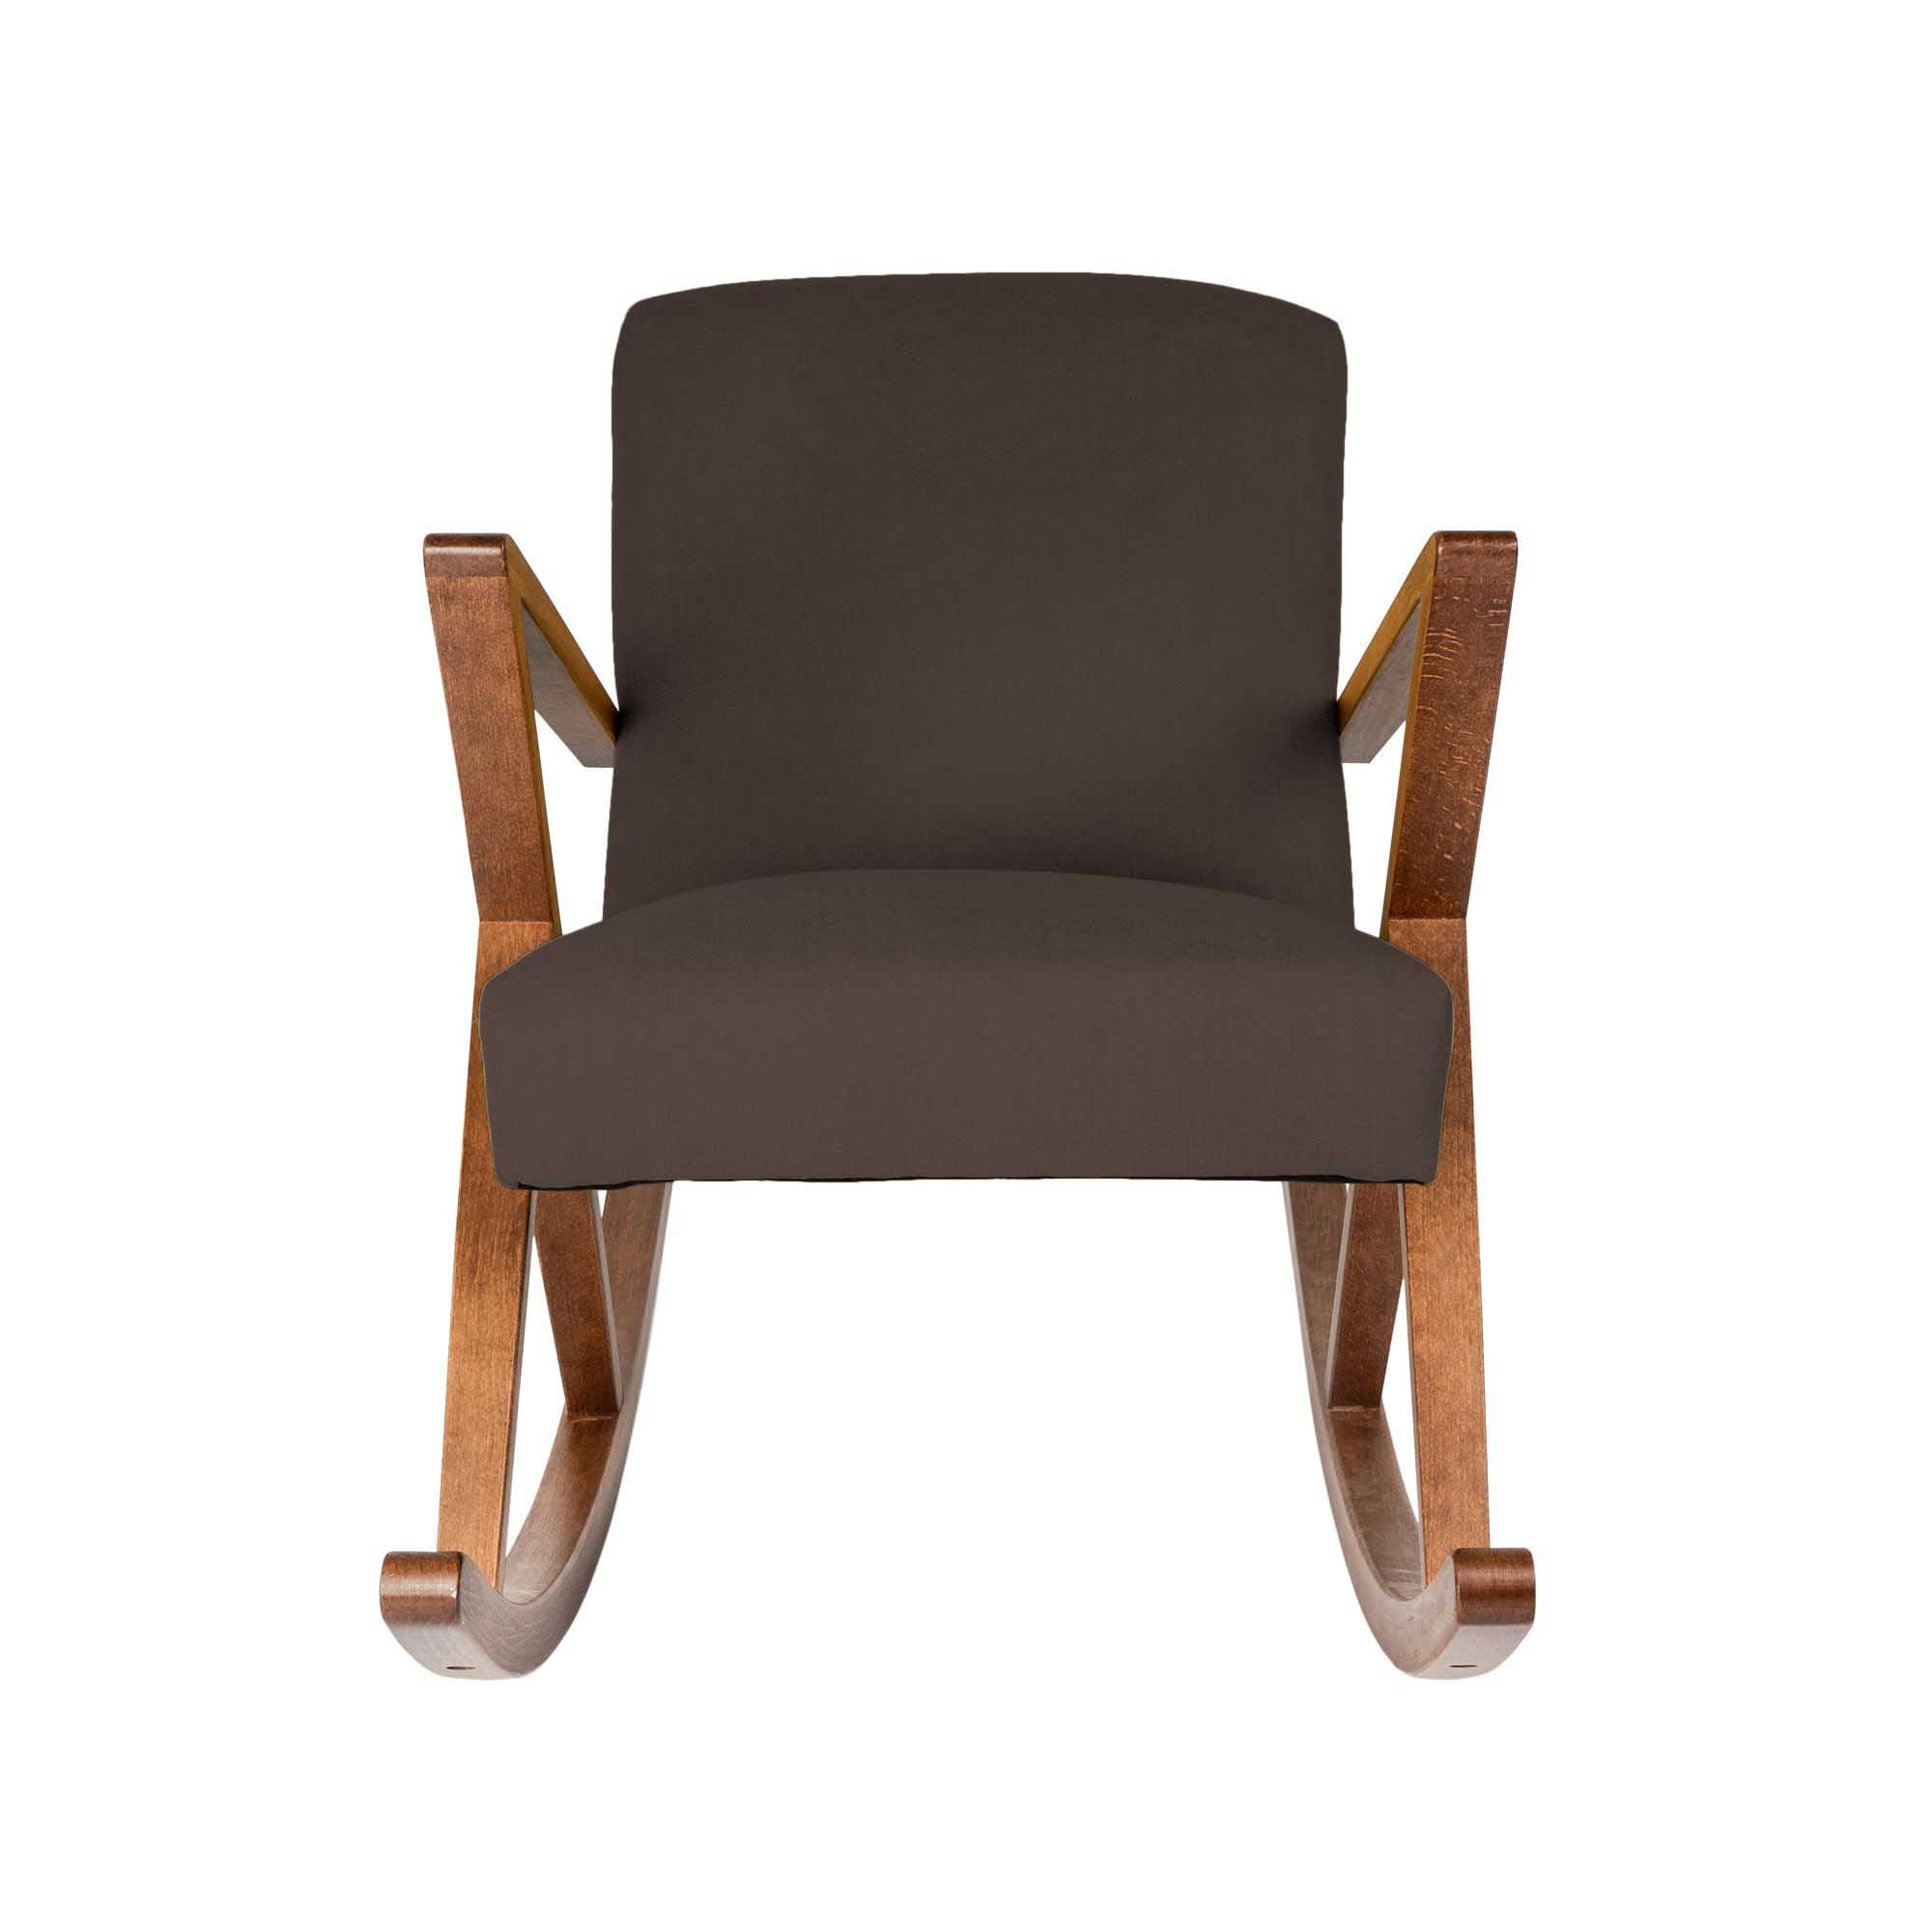  Rocking Chair, Beech Wood Frame, Walnut Colour brown fabric, front view